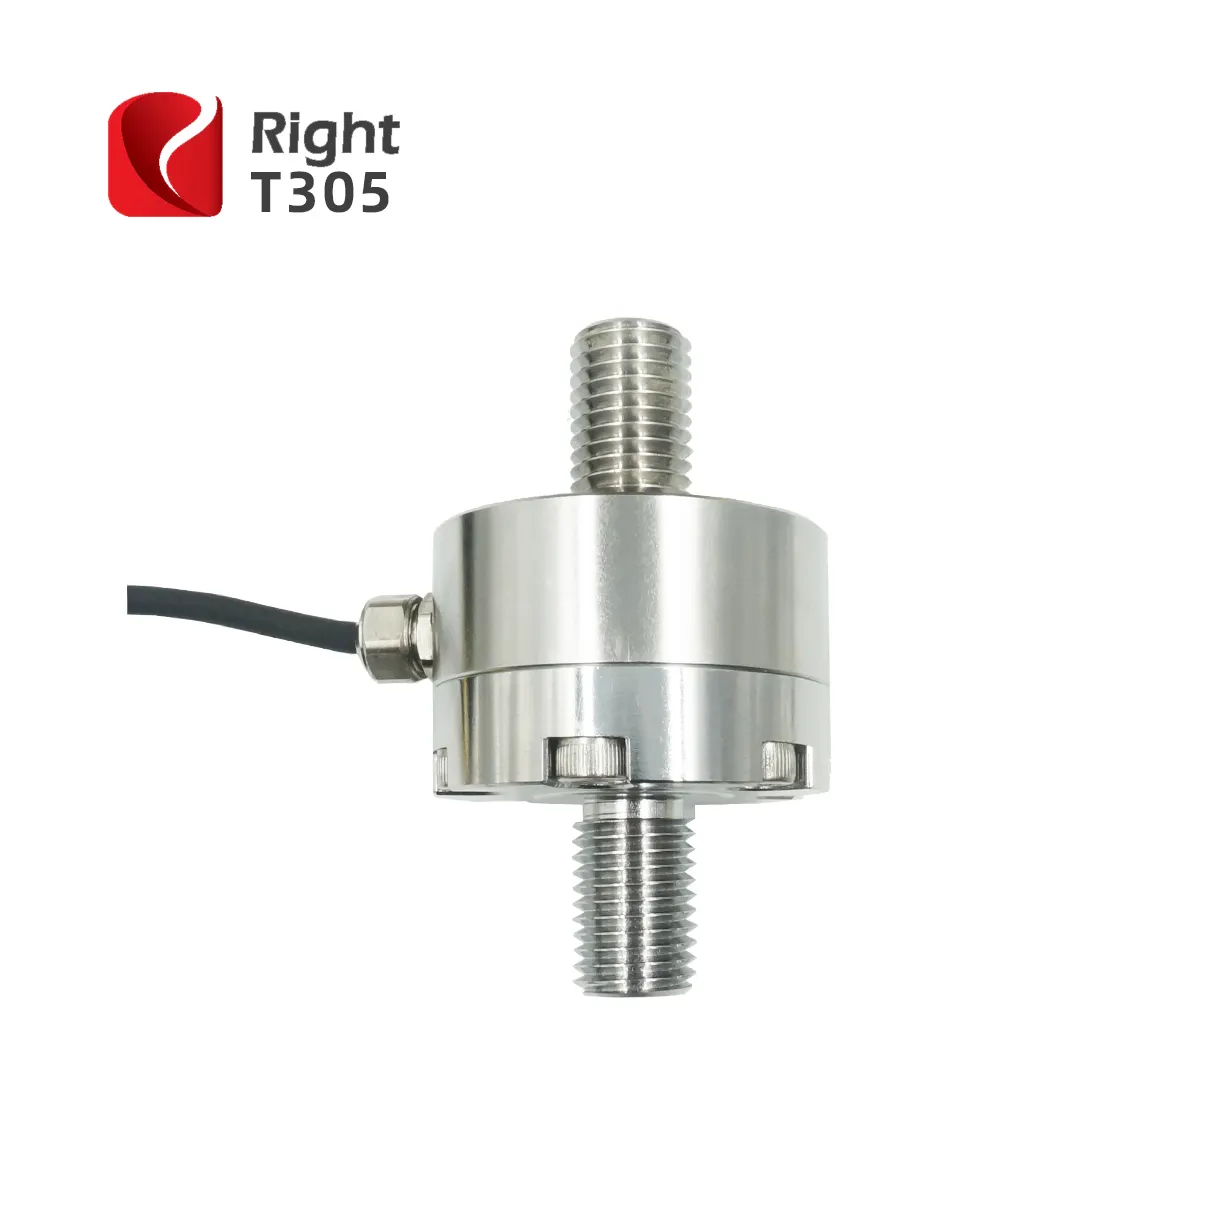 T305 Stainless Steel Compression Tension Inline Force Transducers Sensors Load Cell for New Energy Product Assembly